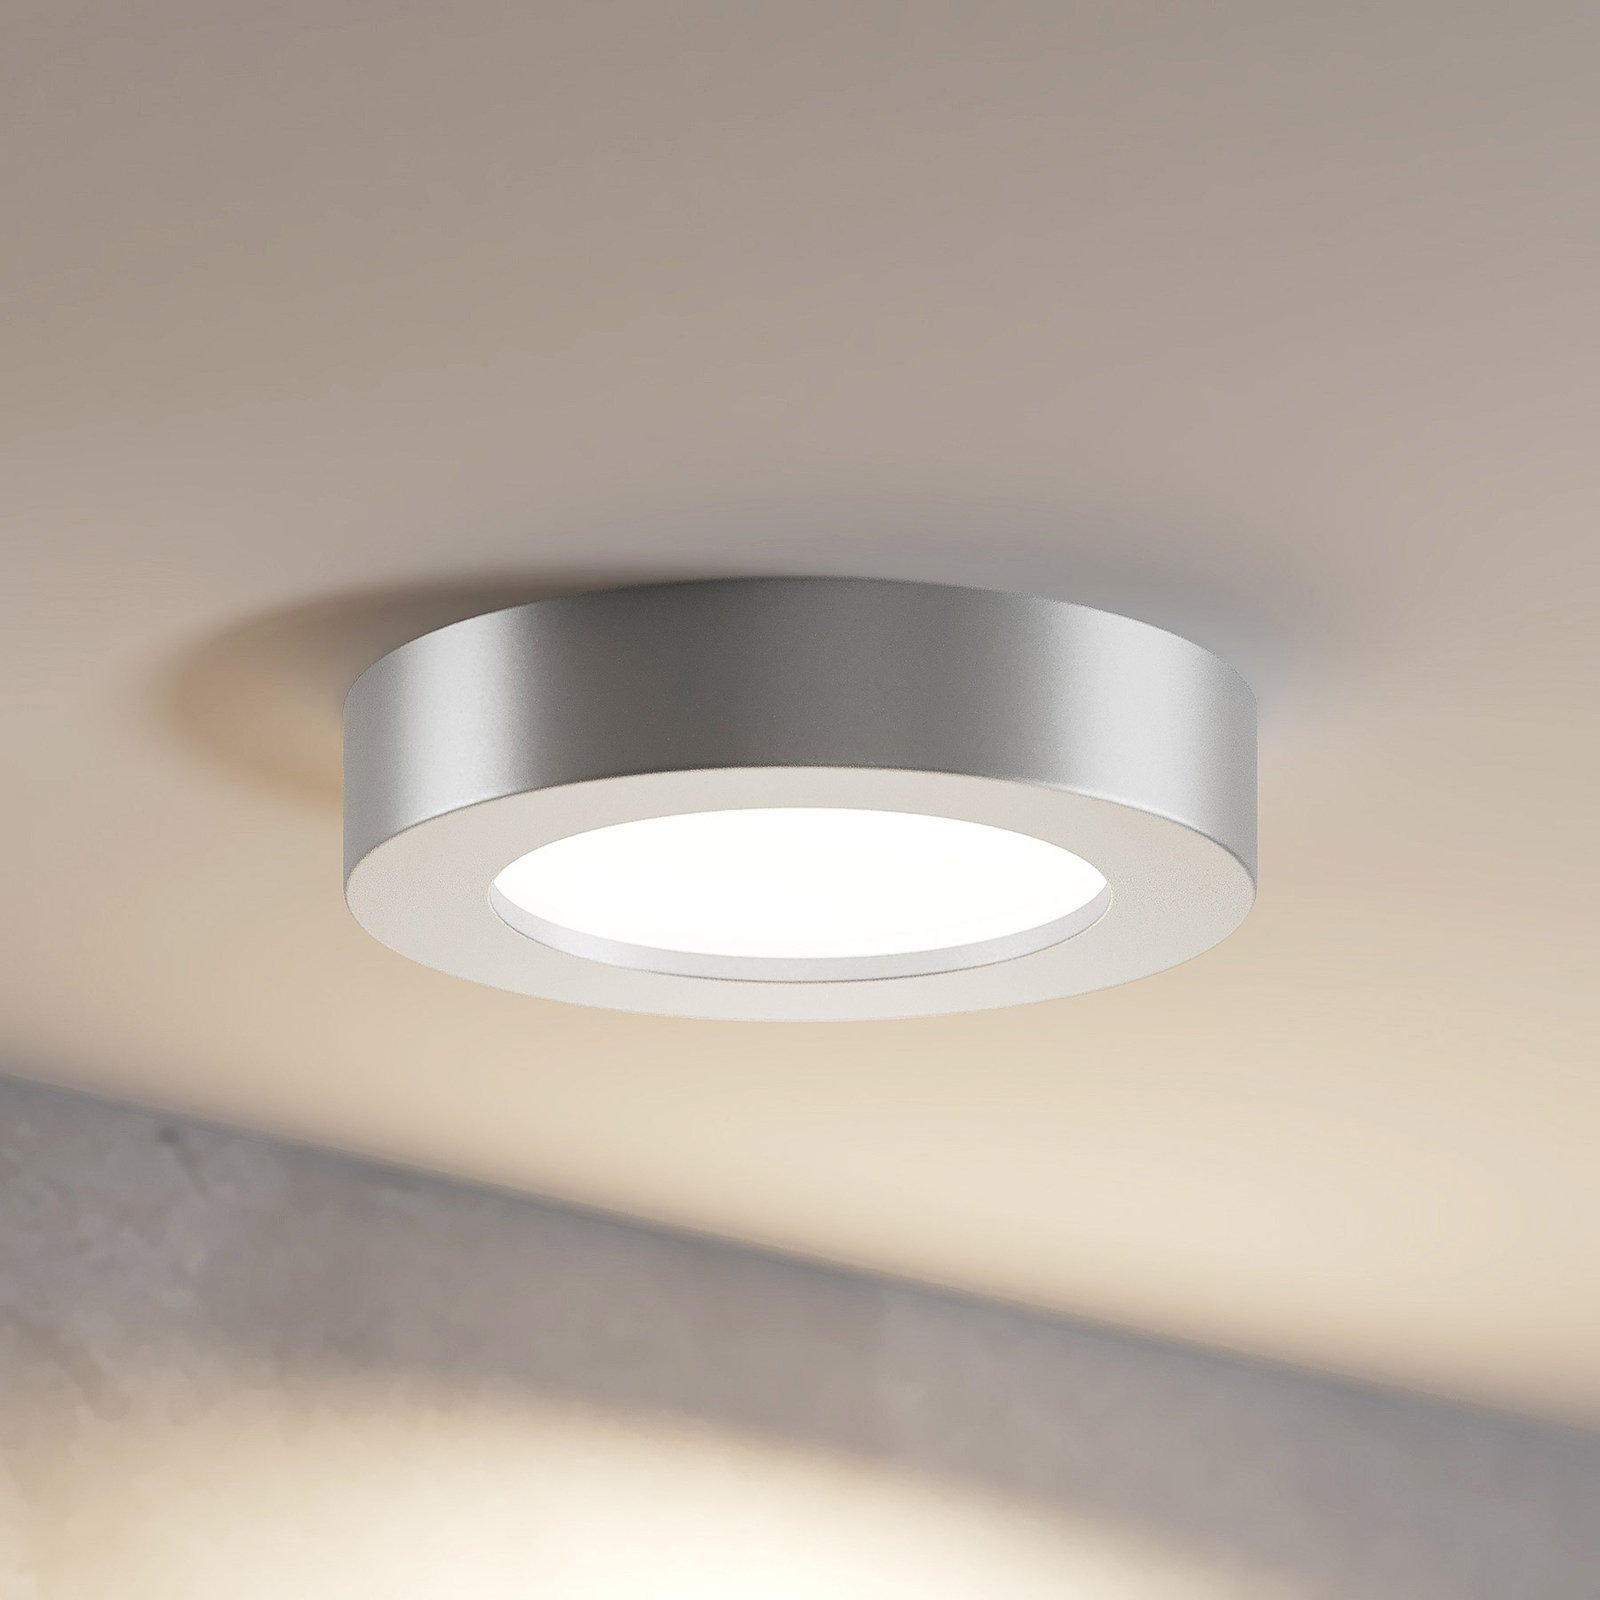 Prios LED ceiling light Edwina, silver, 12.2 cm, dimmable